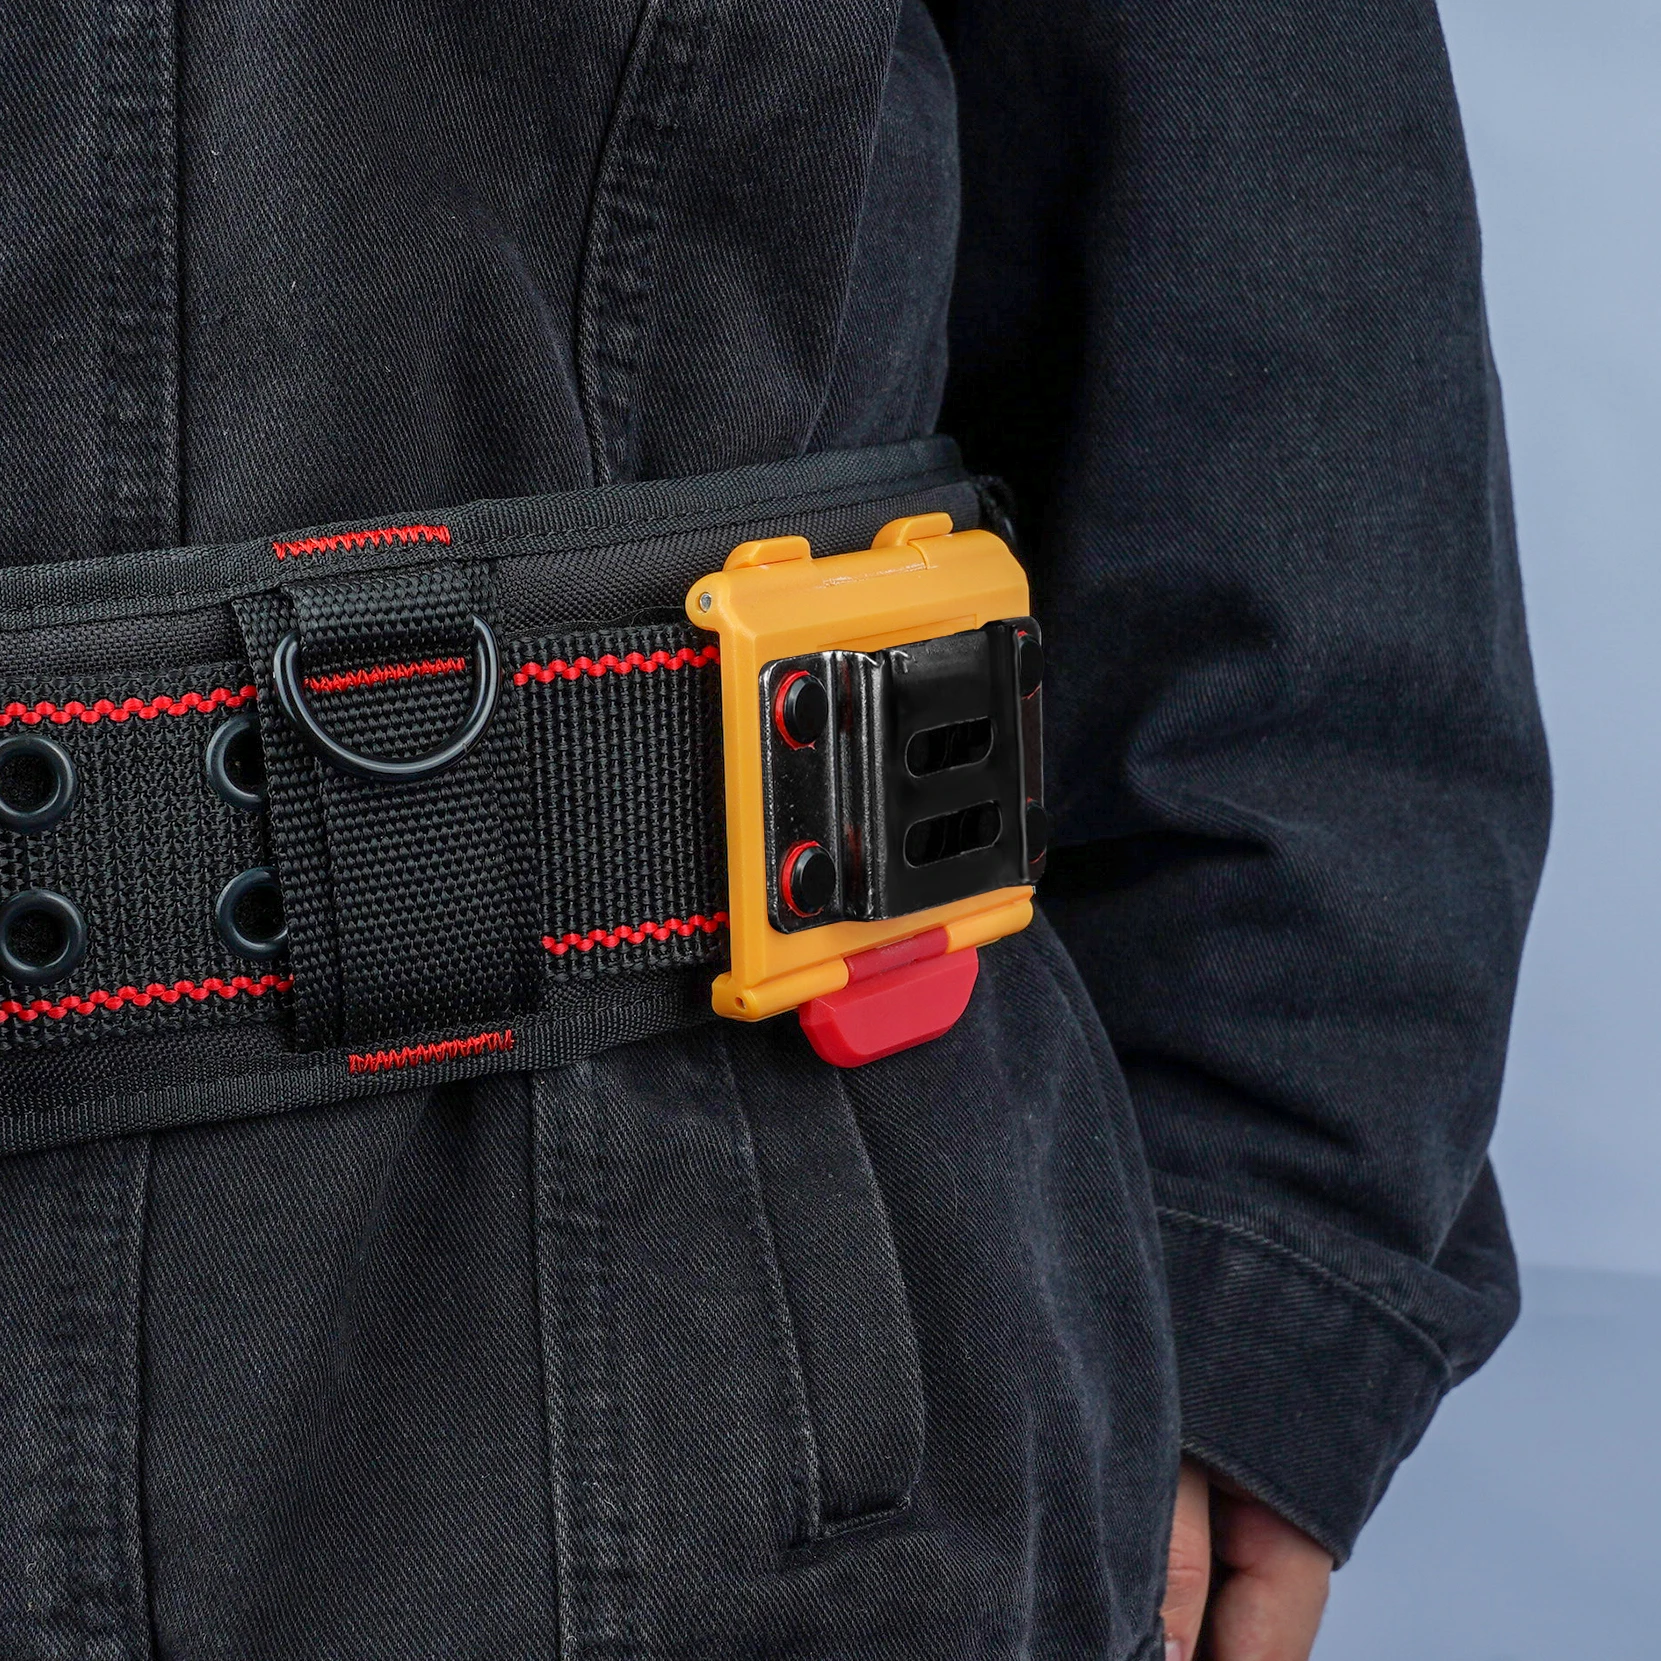 MELOTOUGH Tape Measure Holder ,Drill Holster Belt Clip, Drill Holster with Tool Belt Hook, Suitable for Tape Measurer,Drill